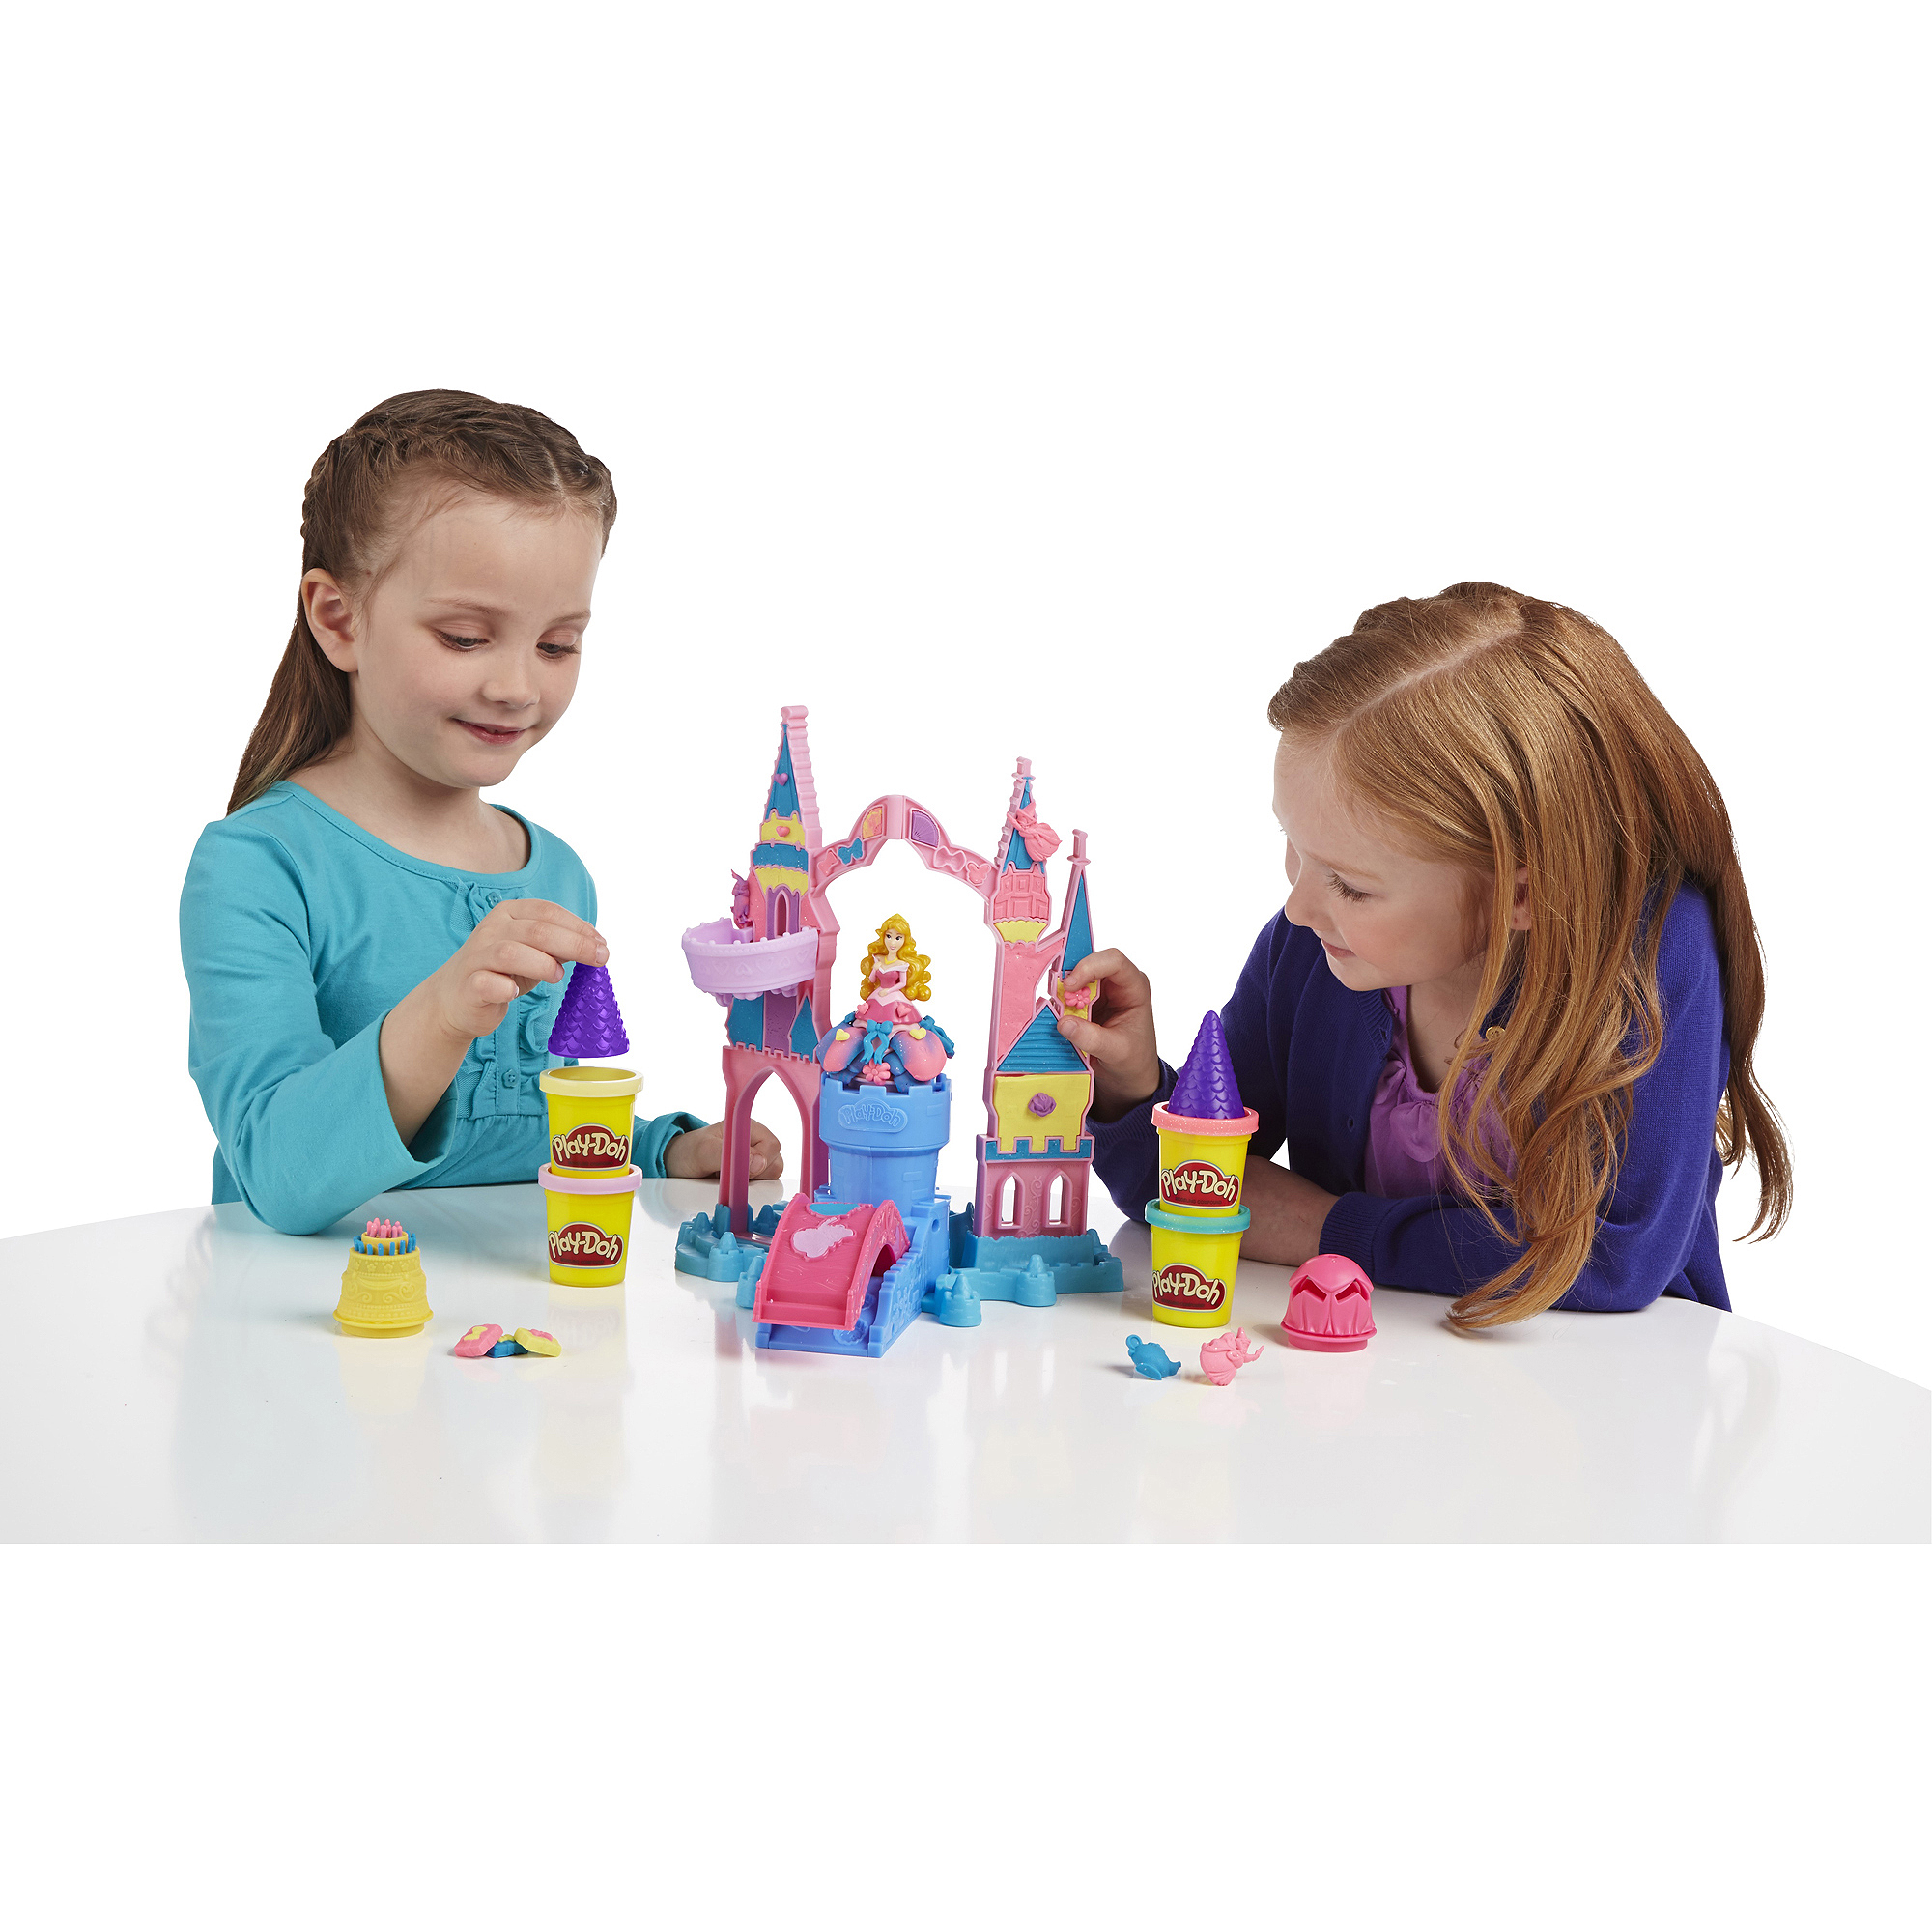 Play-Doh Disney Mix 'N Match Magical Designs Palace Set with Princess Aurora & 4 Cans of Sparkle Play-Doh - image 5 of 13